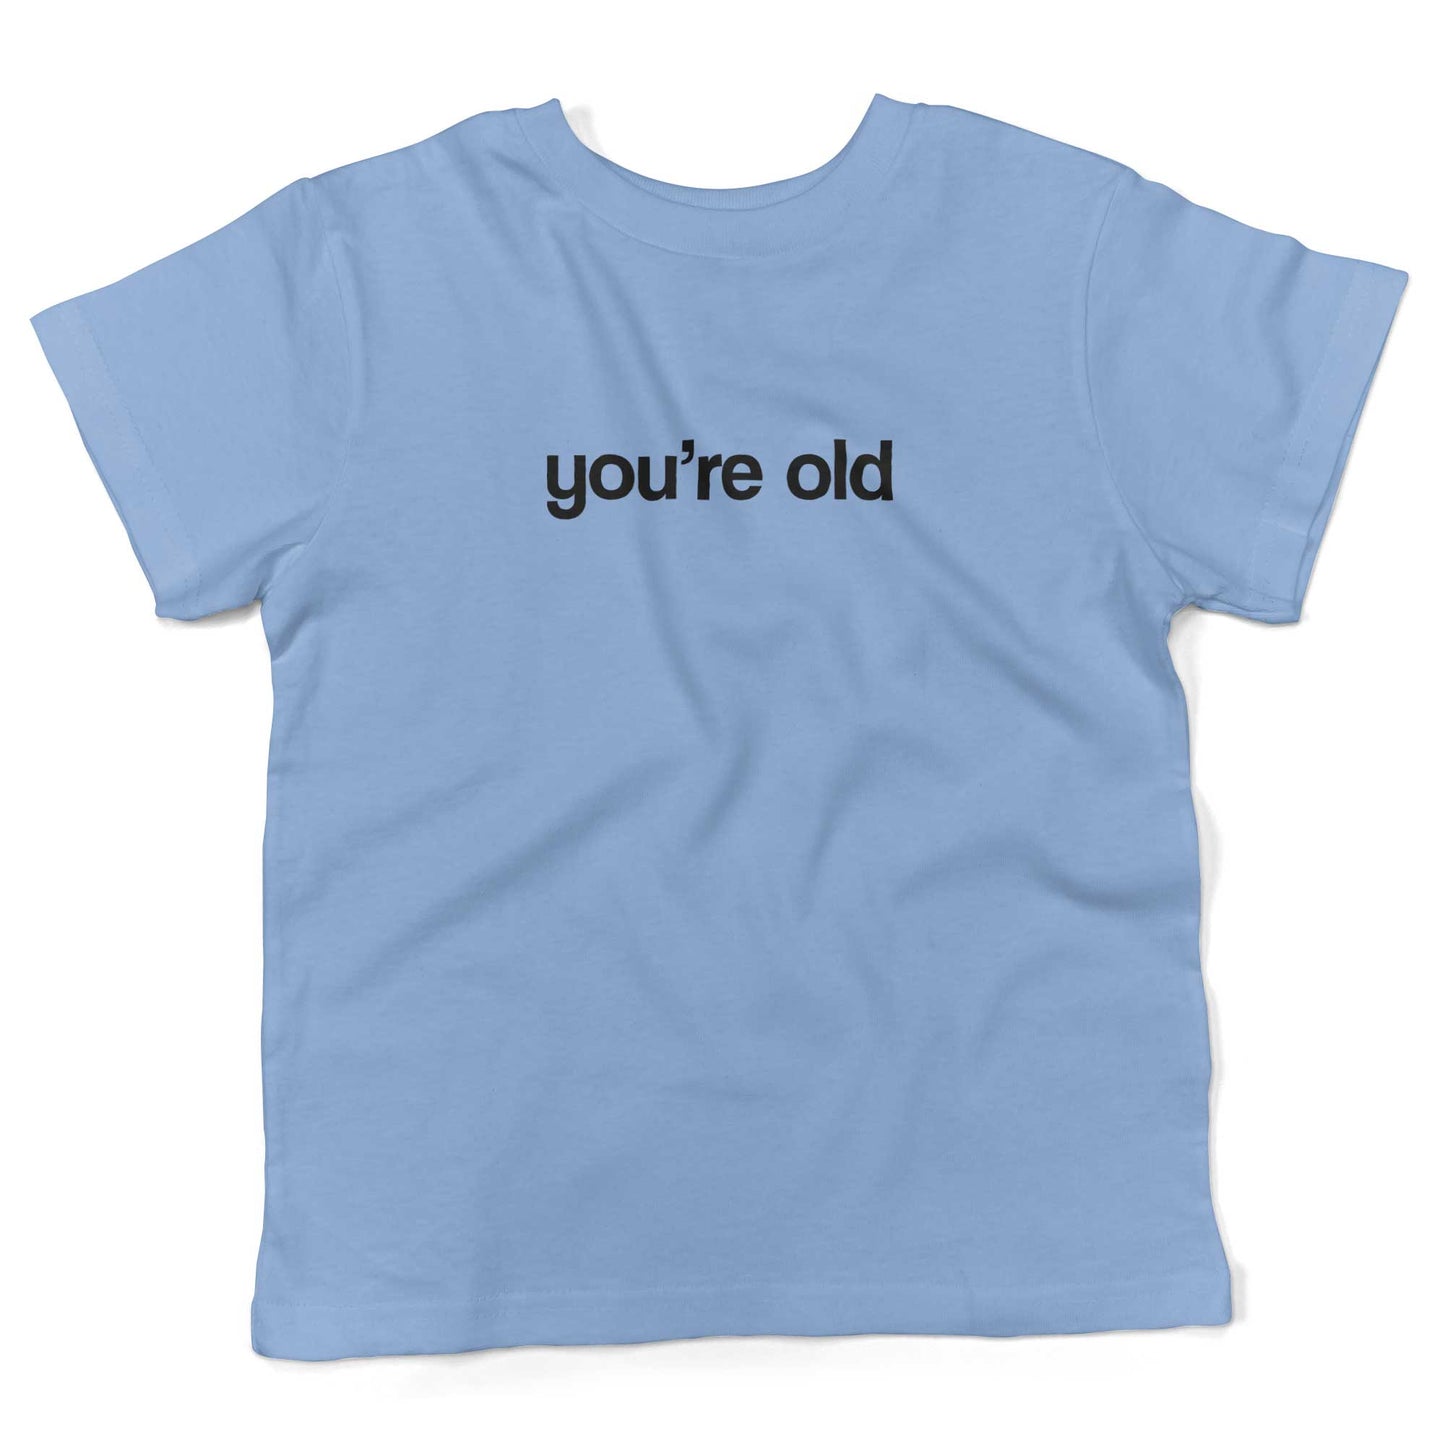 You're Old Toddler Shirt-Organic Baby Blue-2T